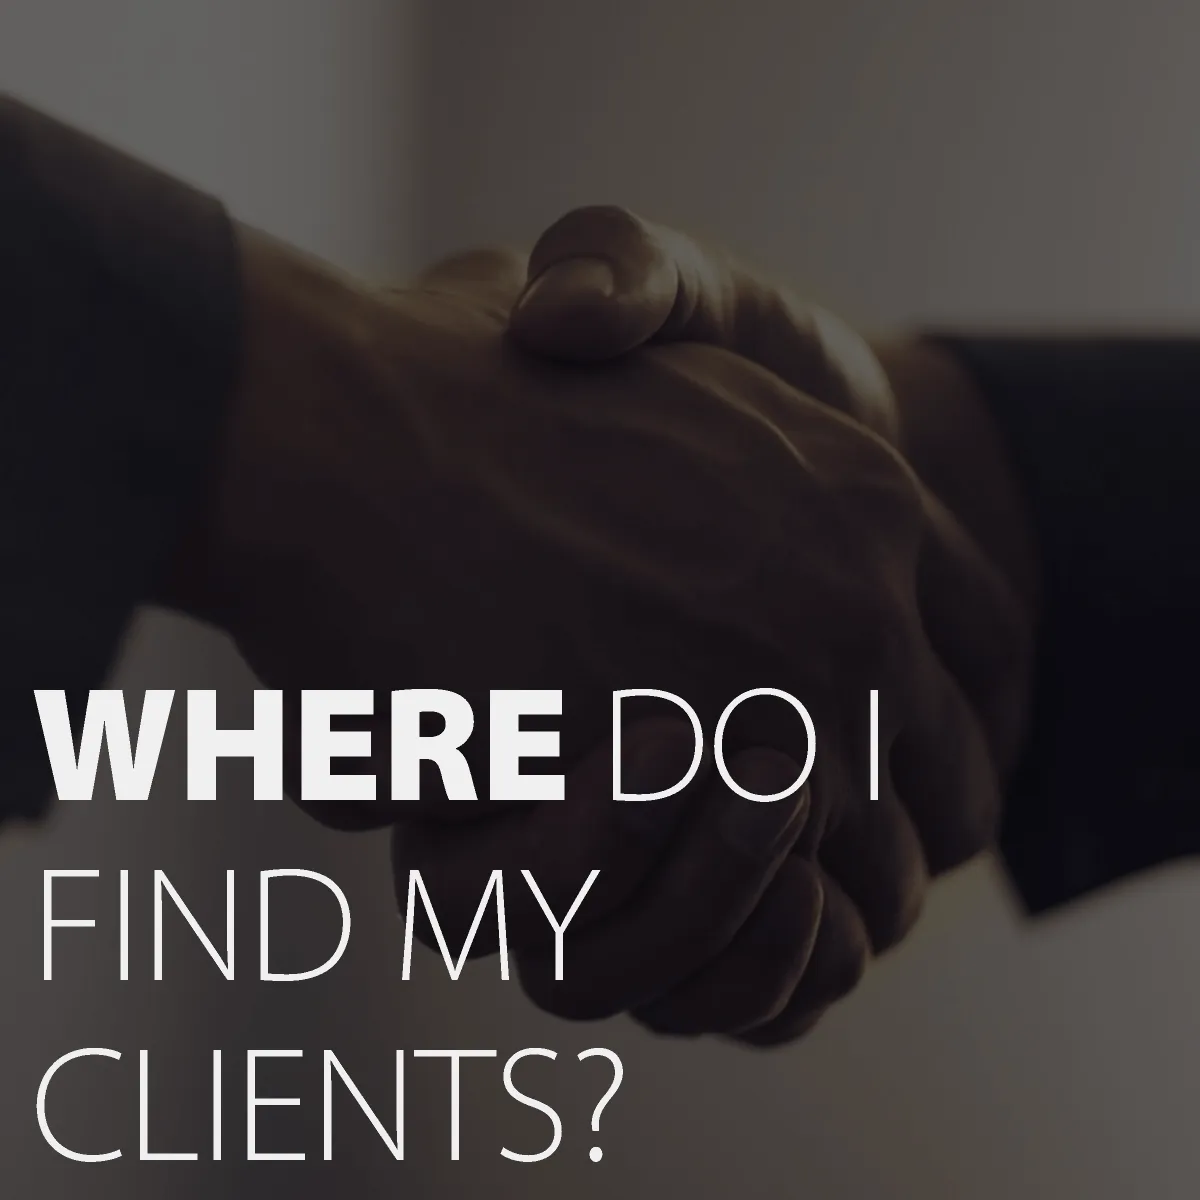 Where do I find clients?